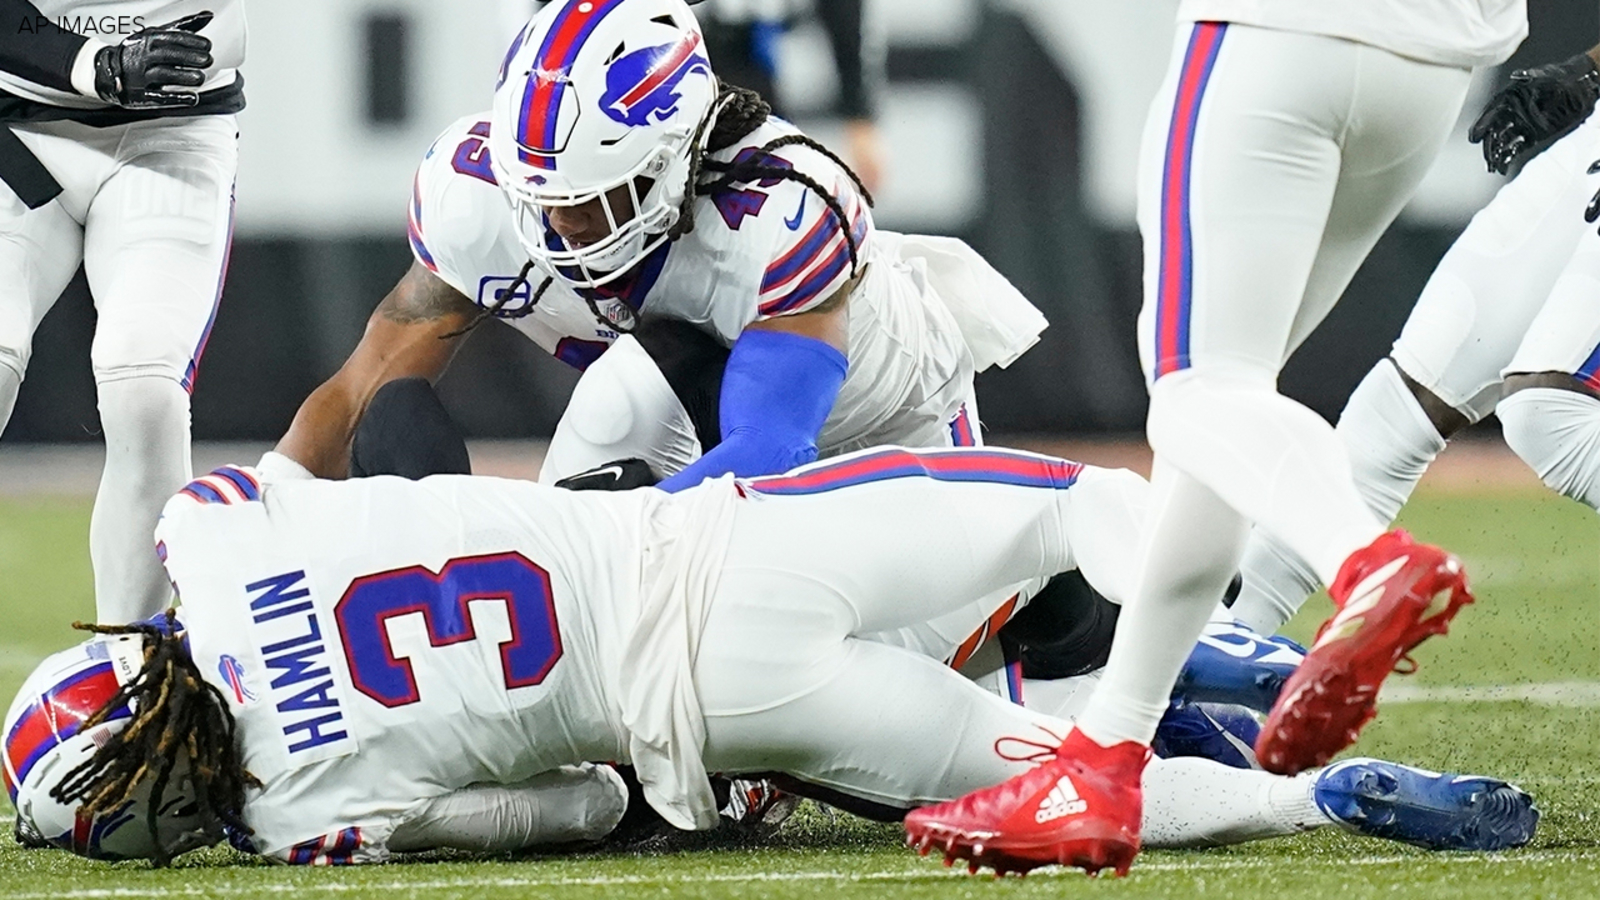 Ian Rapoport reports that the Bills have agreed to pay Damar